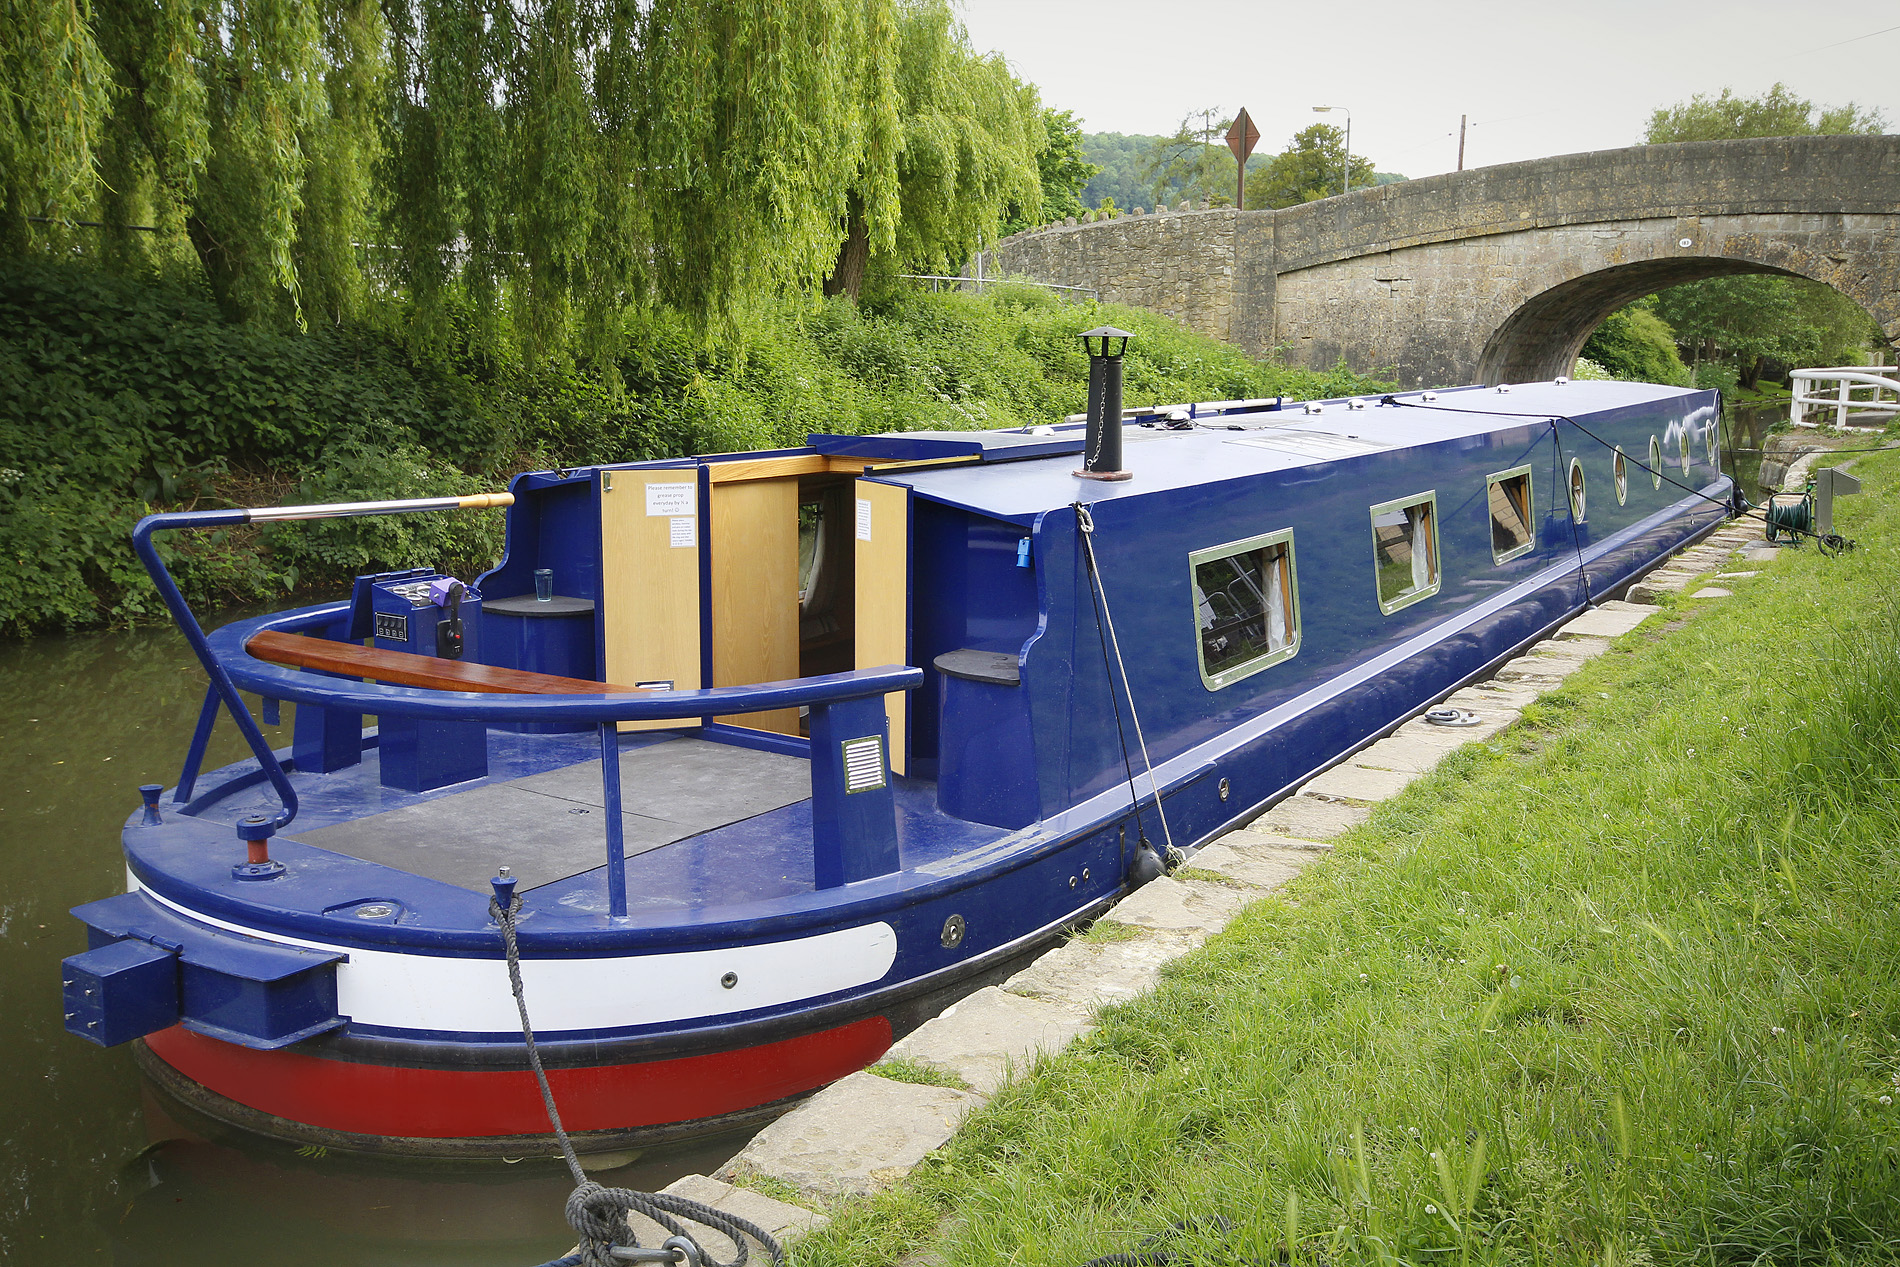 Holiday widebeam Larkspur moored up on the Kennet & Avon Canal